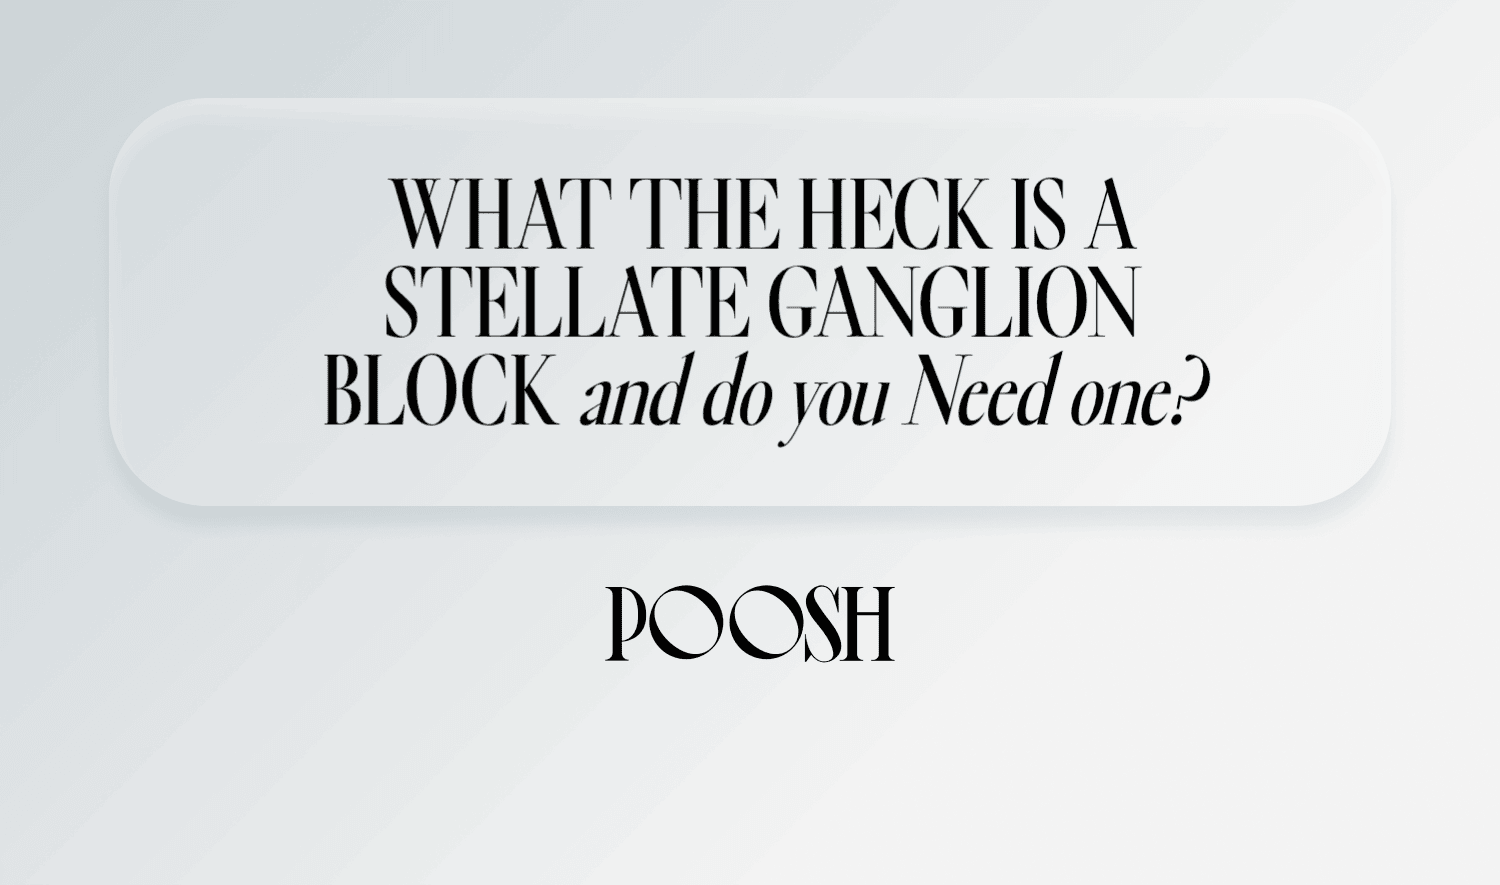 What the heck is a Stellate Ganglion Block and do you need one?